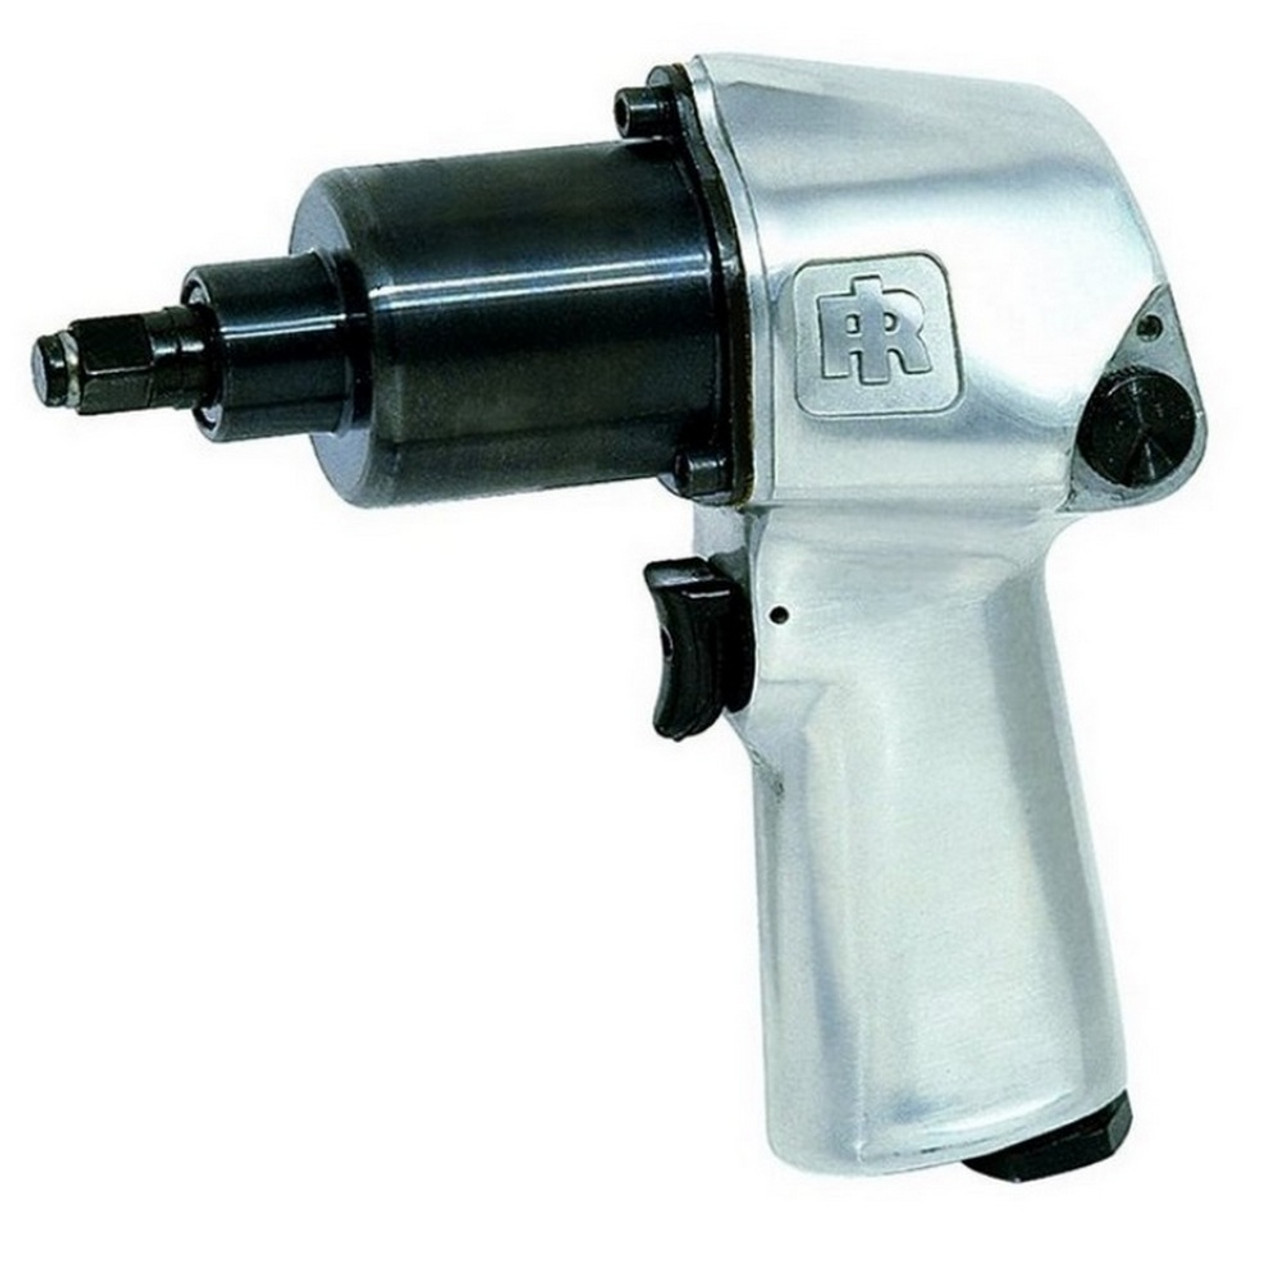 Ingersoll Rand 212: 3/8" Impact Wrench